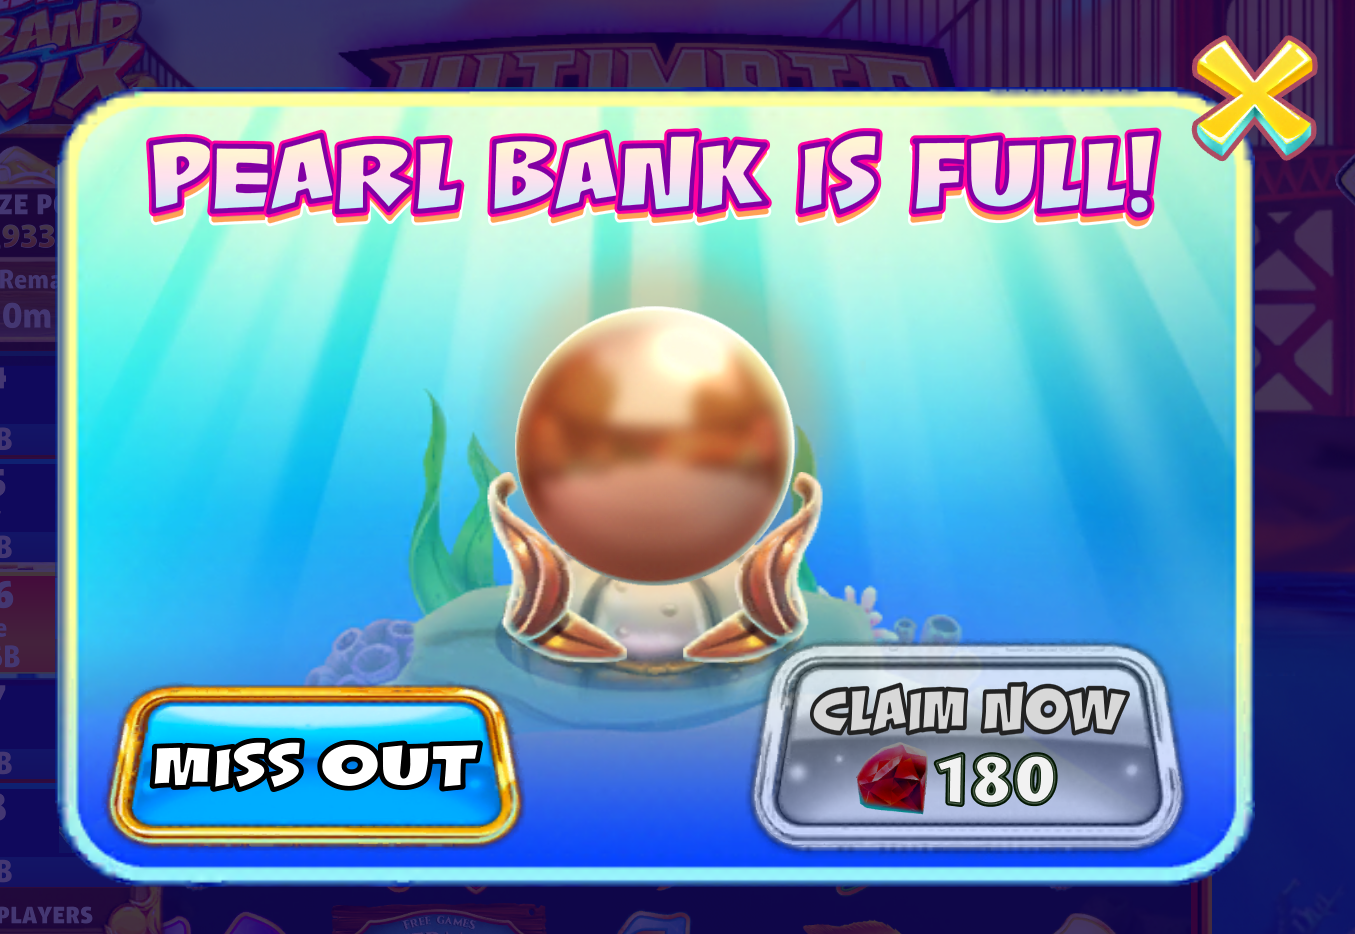 gfc_pearlyprize-fullbank.png